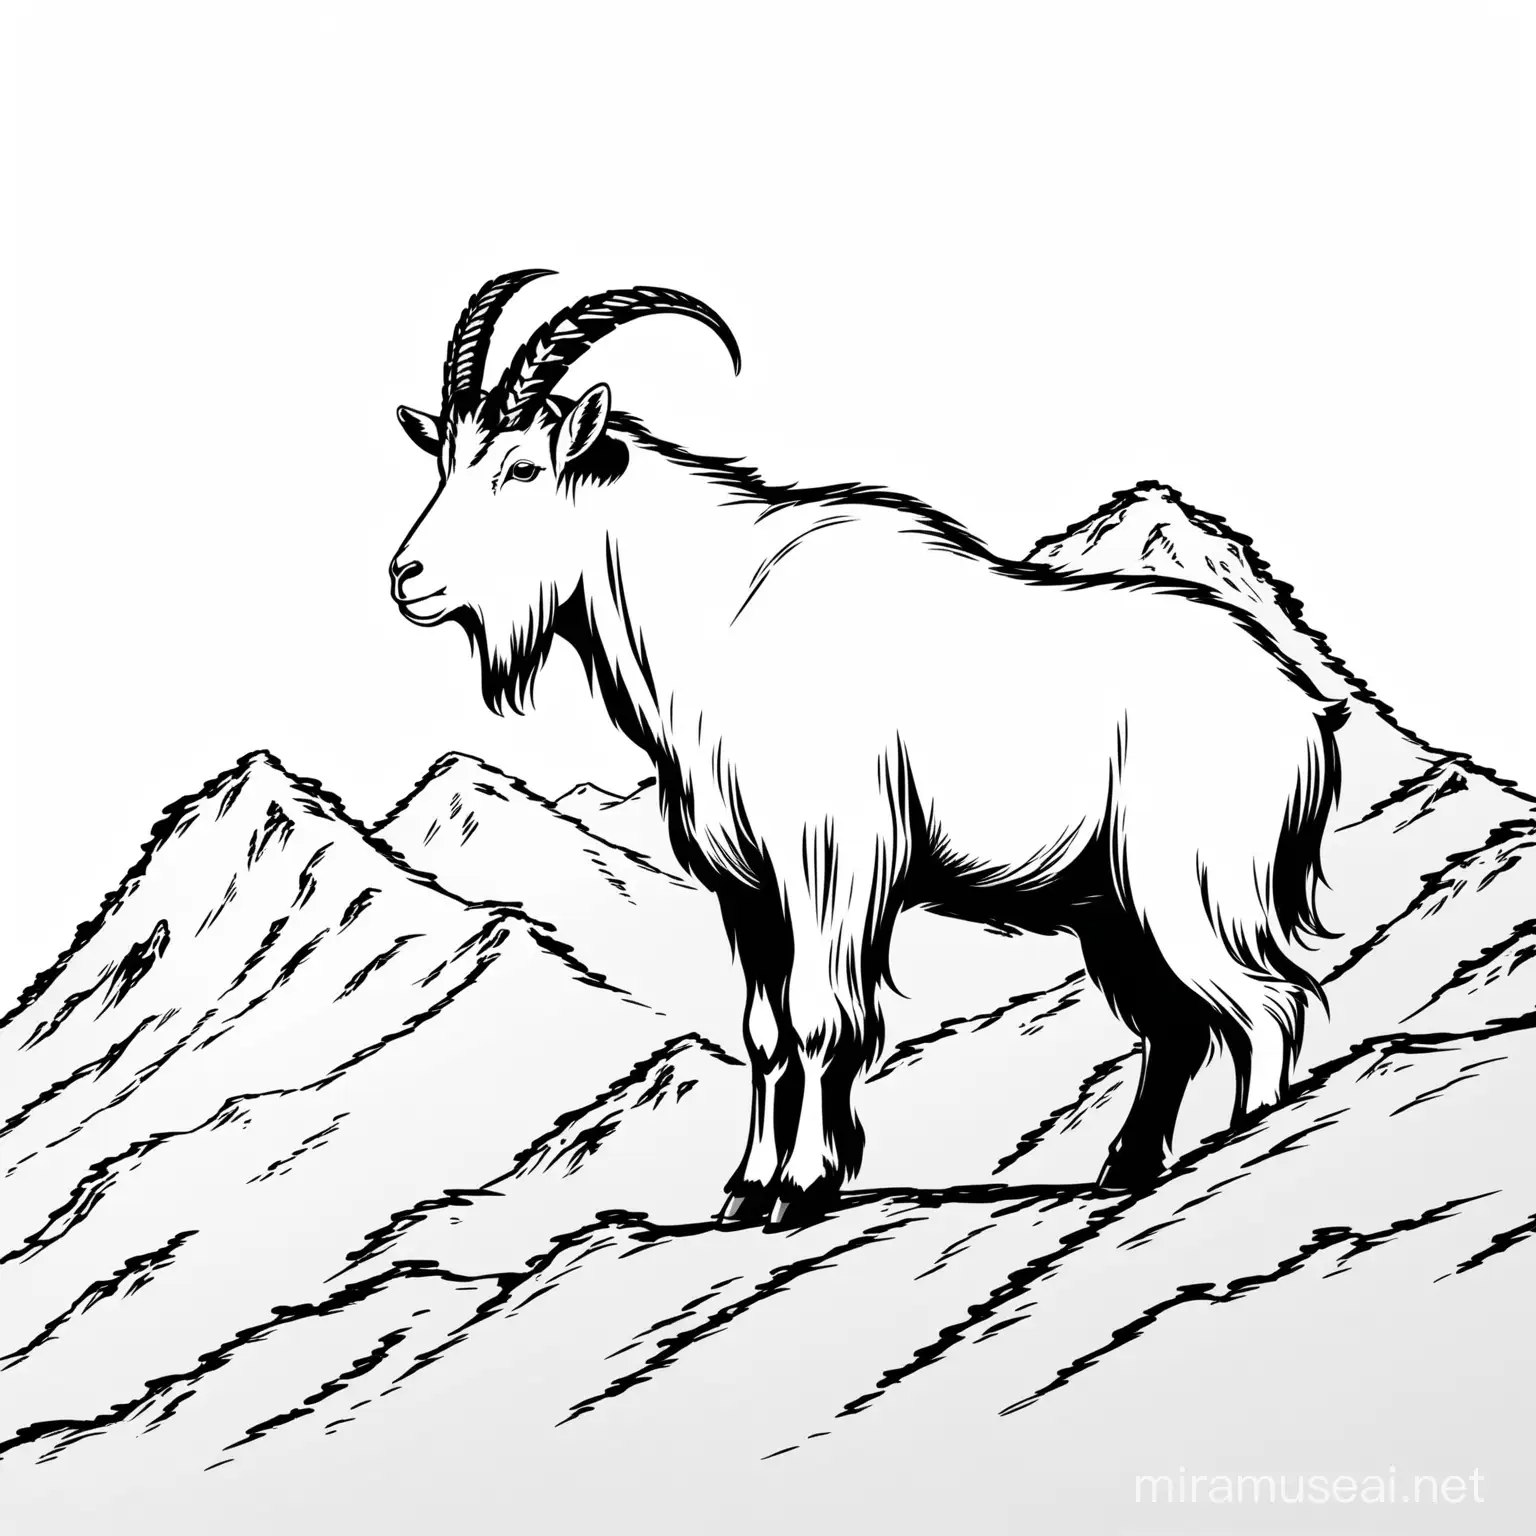 Graceful Mountain Goat Silhouette on White Background